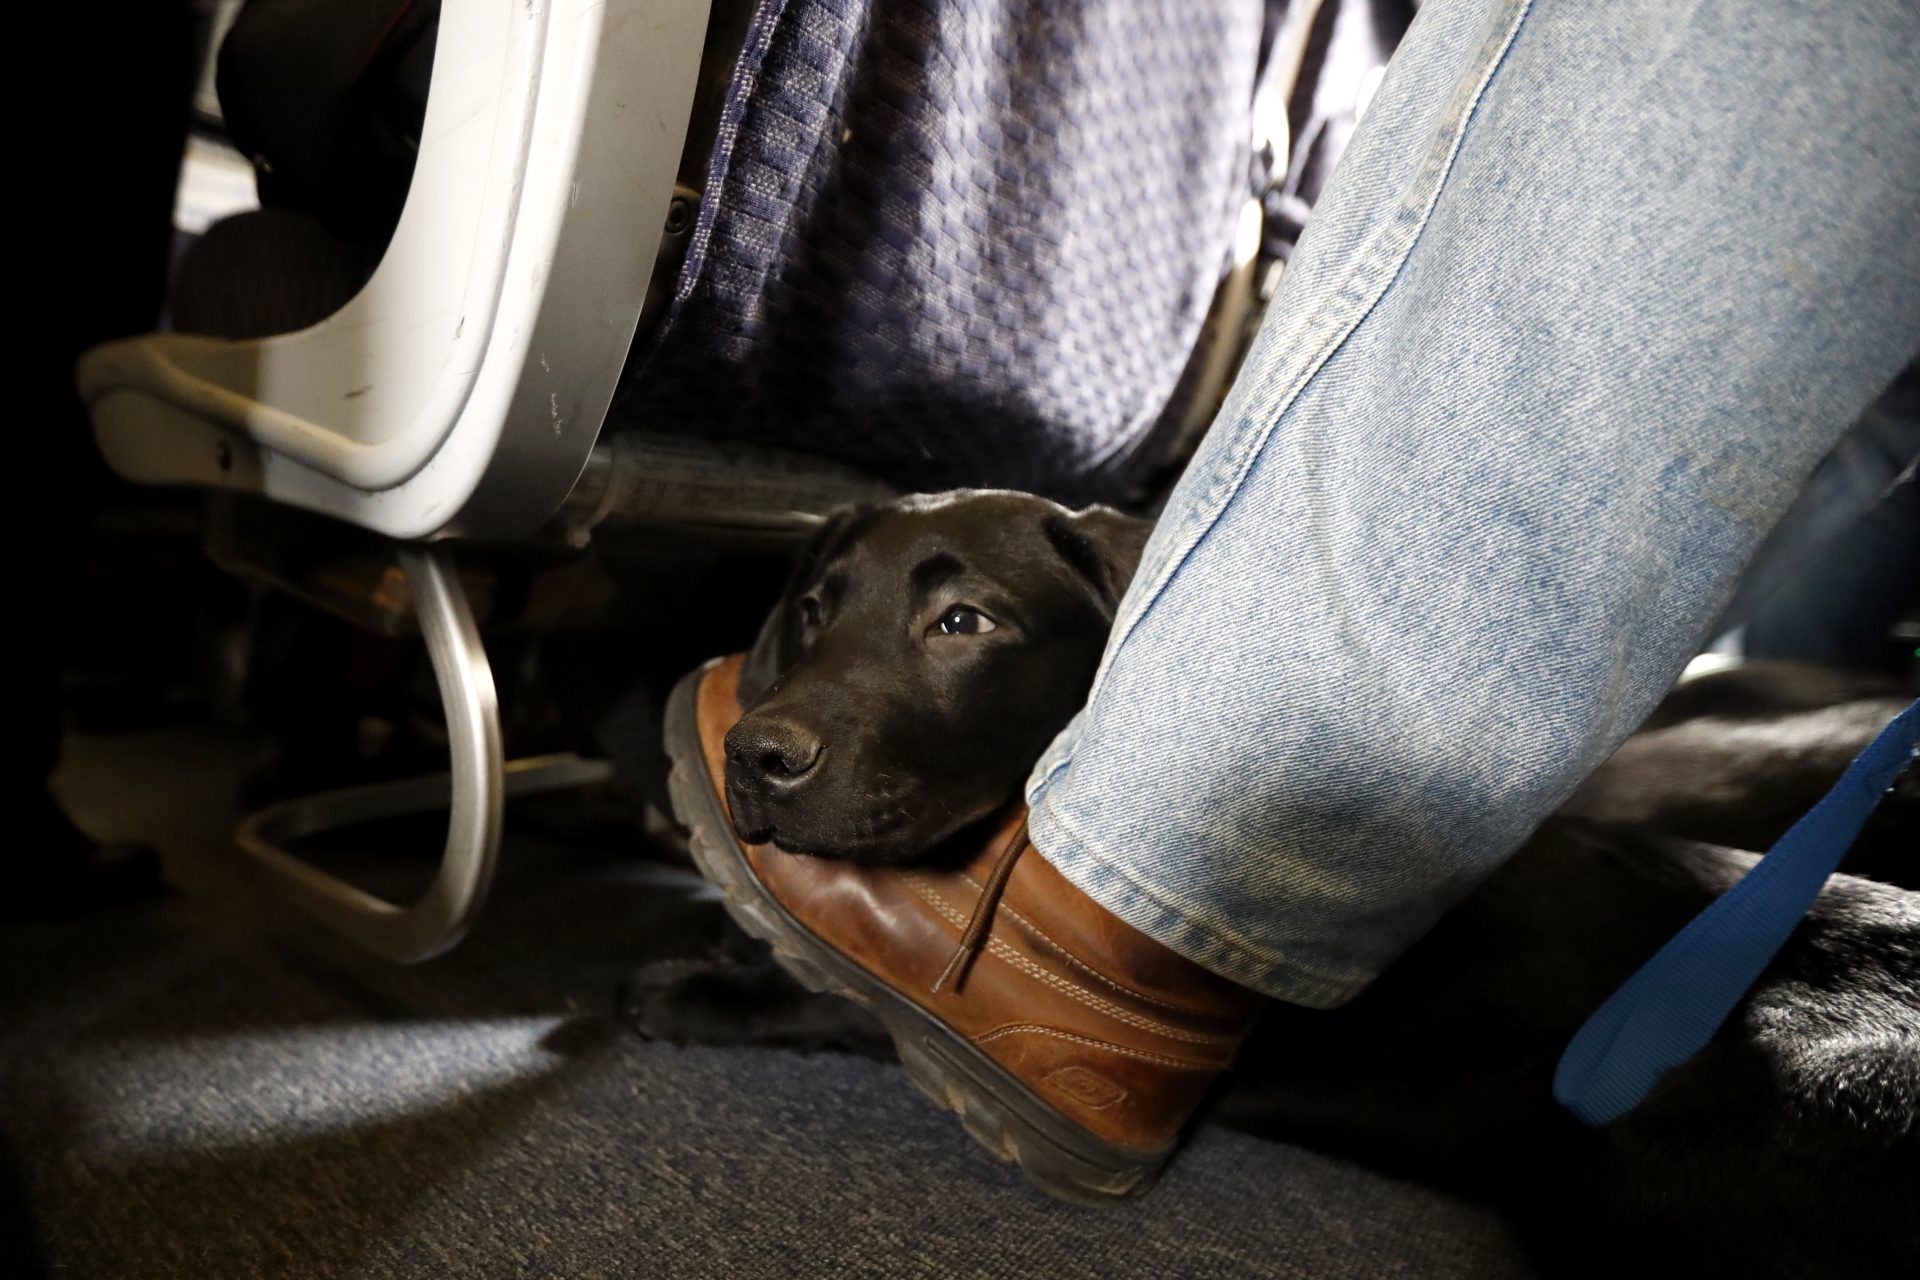 In this April 1, 2017, file photo, a service dog named Orlando rests on the foot of its trainer, John Reddan, of Warwick, N.Y., while sitting inside a United Airlines plane at Newark Liberty International Airport during a training exercise in Newark, N.J. Trainers took dogs through security check and onto a plane as part of the exercise put on by the Seeing Eye puppy program. If your pet must travel, experts say that the cabin is safer than the cargo hold. Pets too large to fit in an under-seat carrier must go cargo unless it's a service or emotional-support animal.